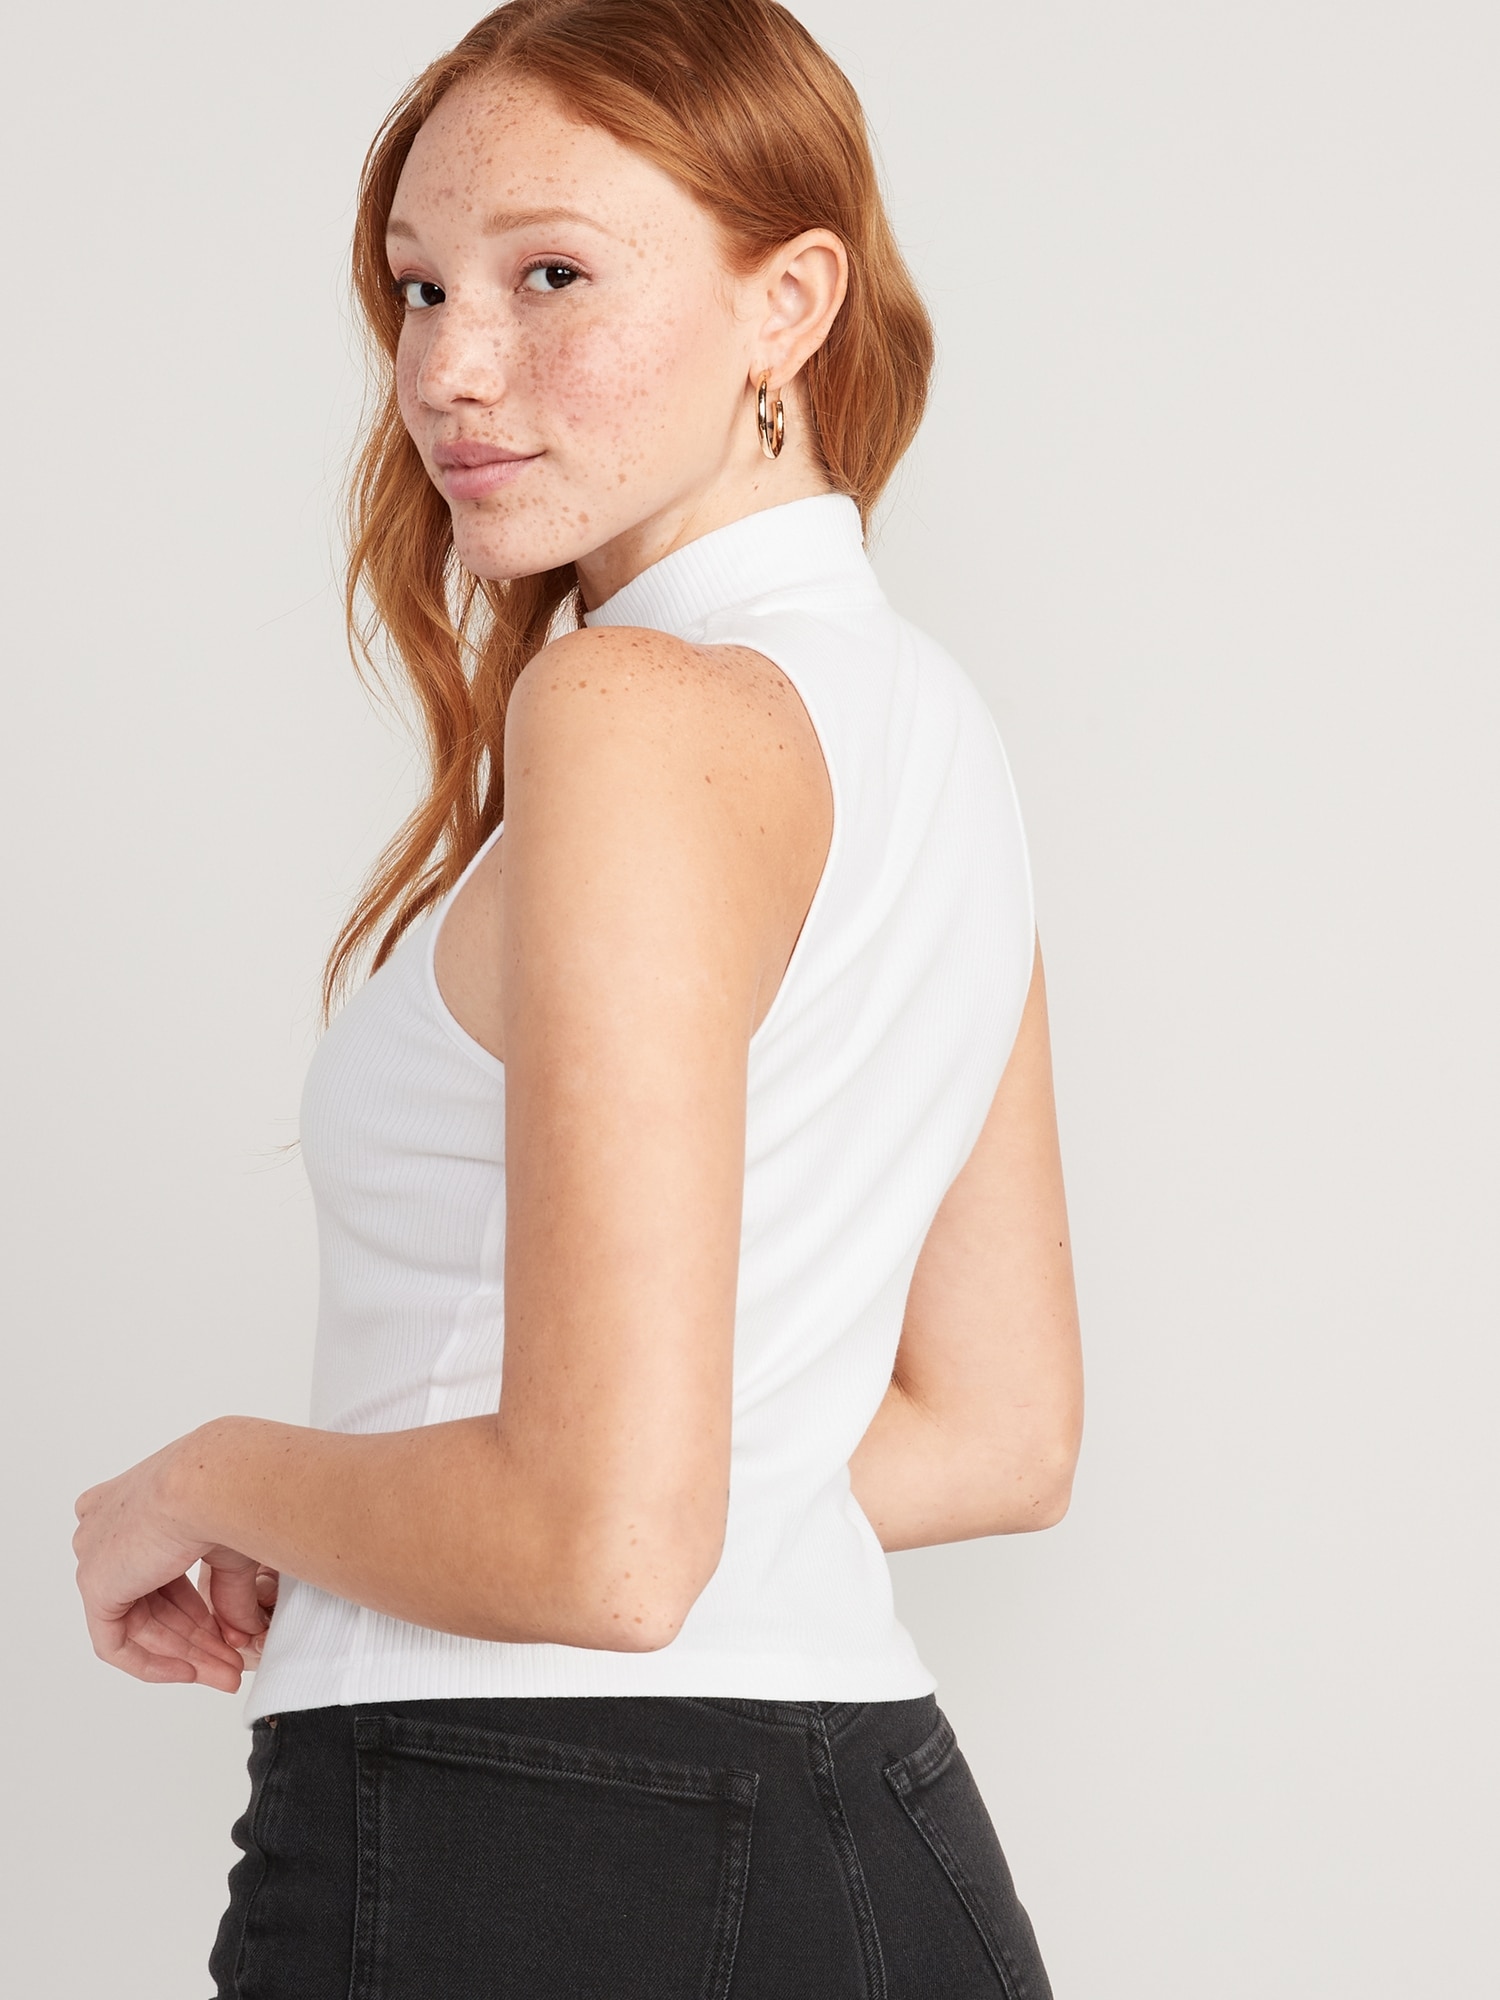 Fitted Sleeveless Mock-Neck Top